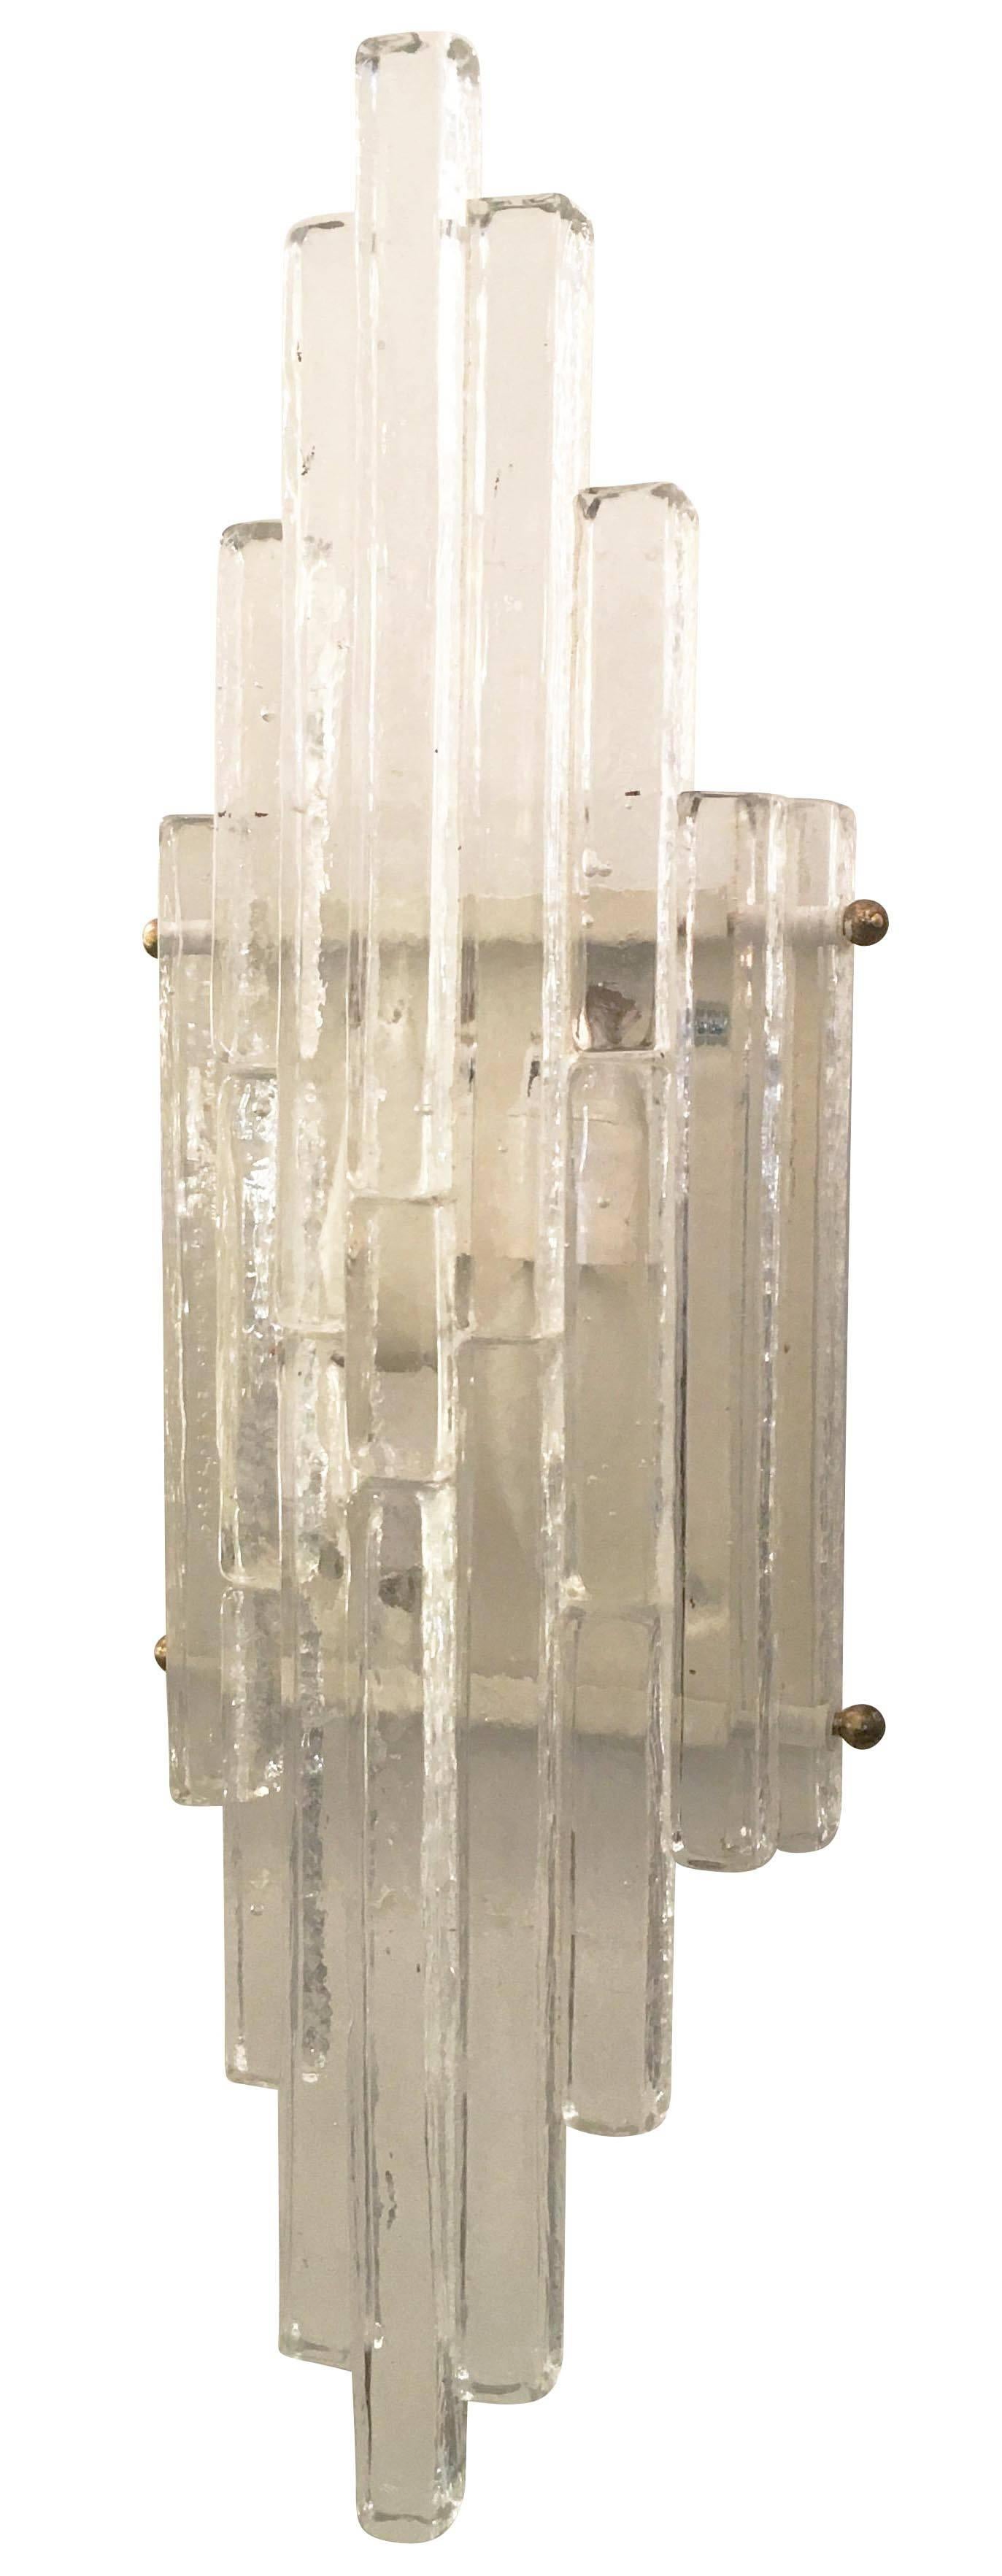 Sculptural pair of sconces by Poliarte composed of interlocking glass rectangles of different sizes. All the glass pieces are clear and are held together by two metal rods which allow for them to lock on to the white painted frames. Each holds two